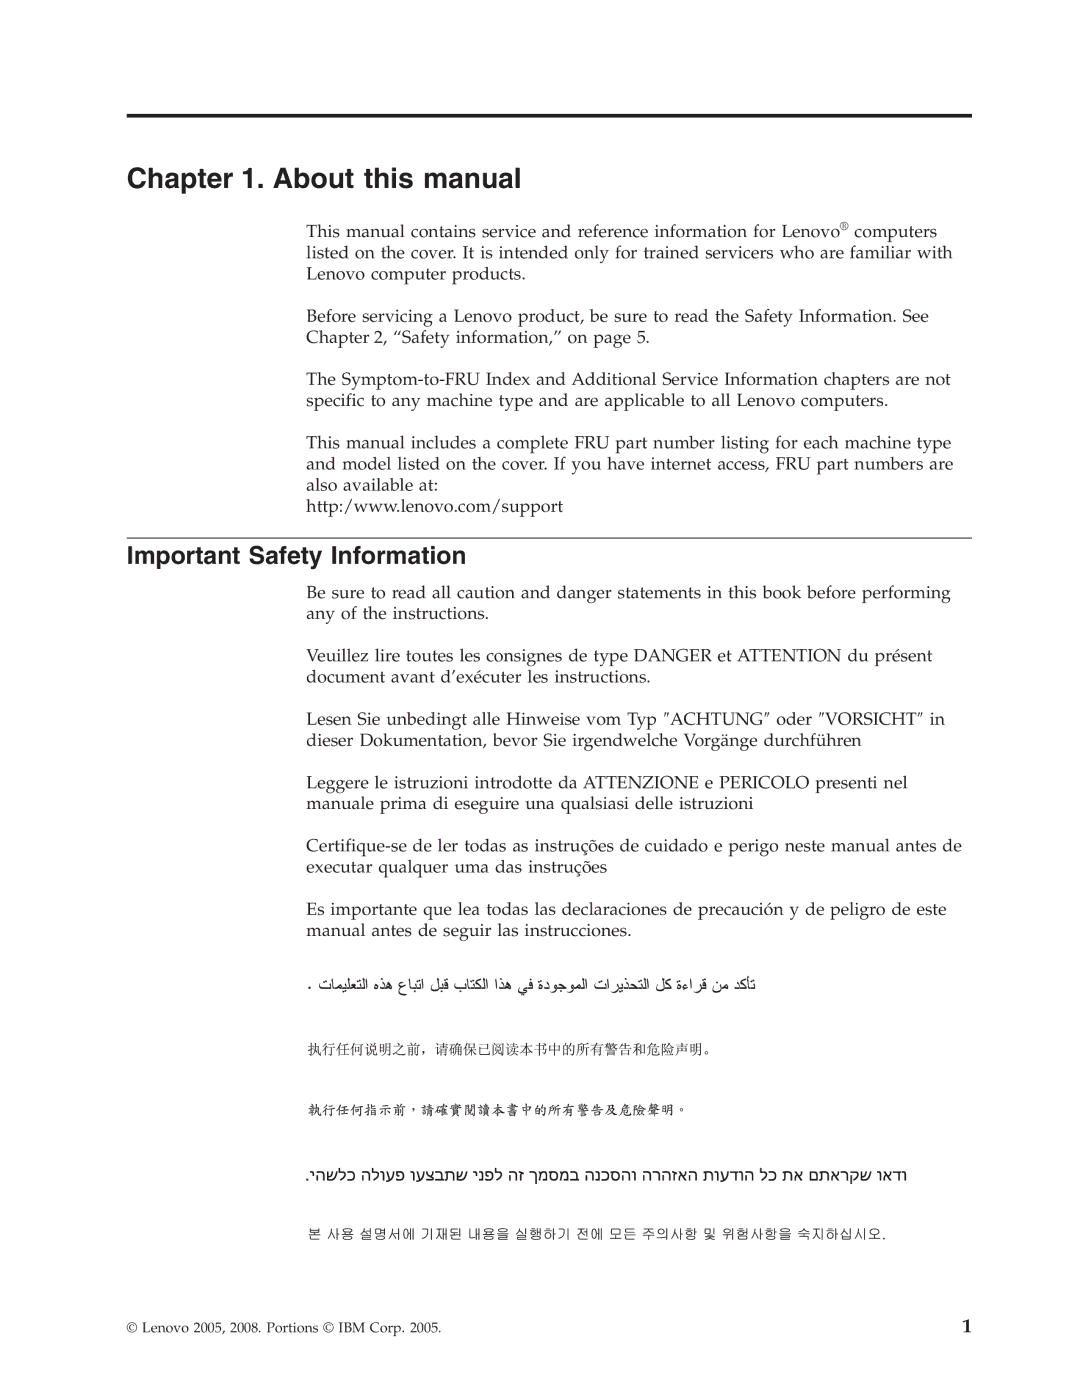 Lenovo E200 About this manual, Important Safety Information 